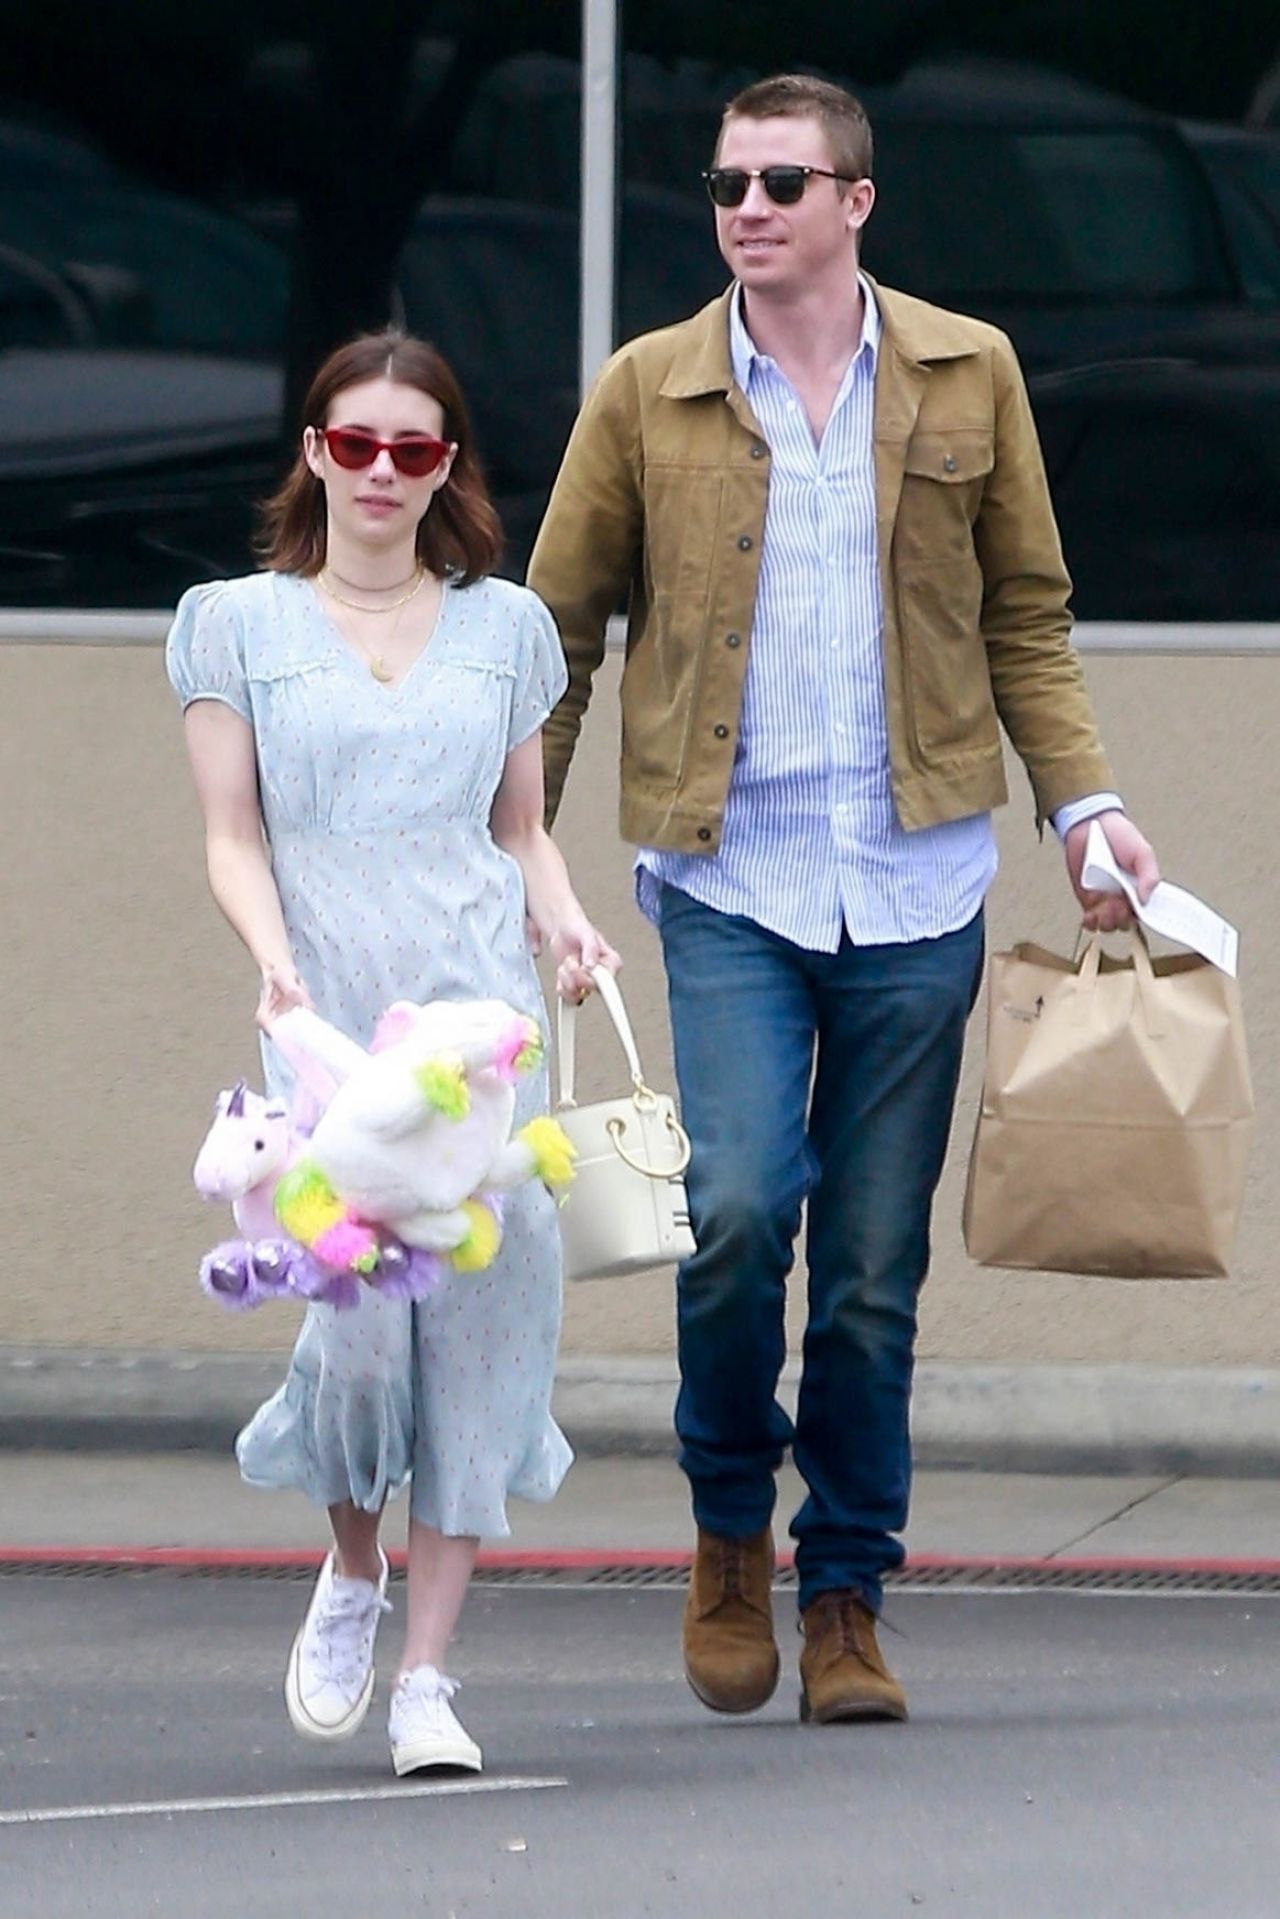 emma-roberts-shopping-on-easter-in-los-angeles-04-21-2019-6.jpg